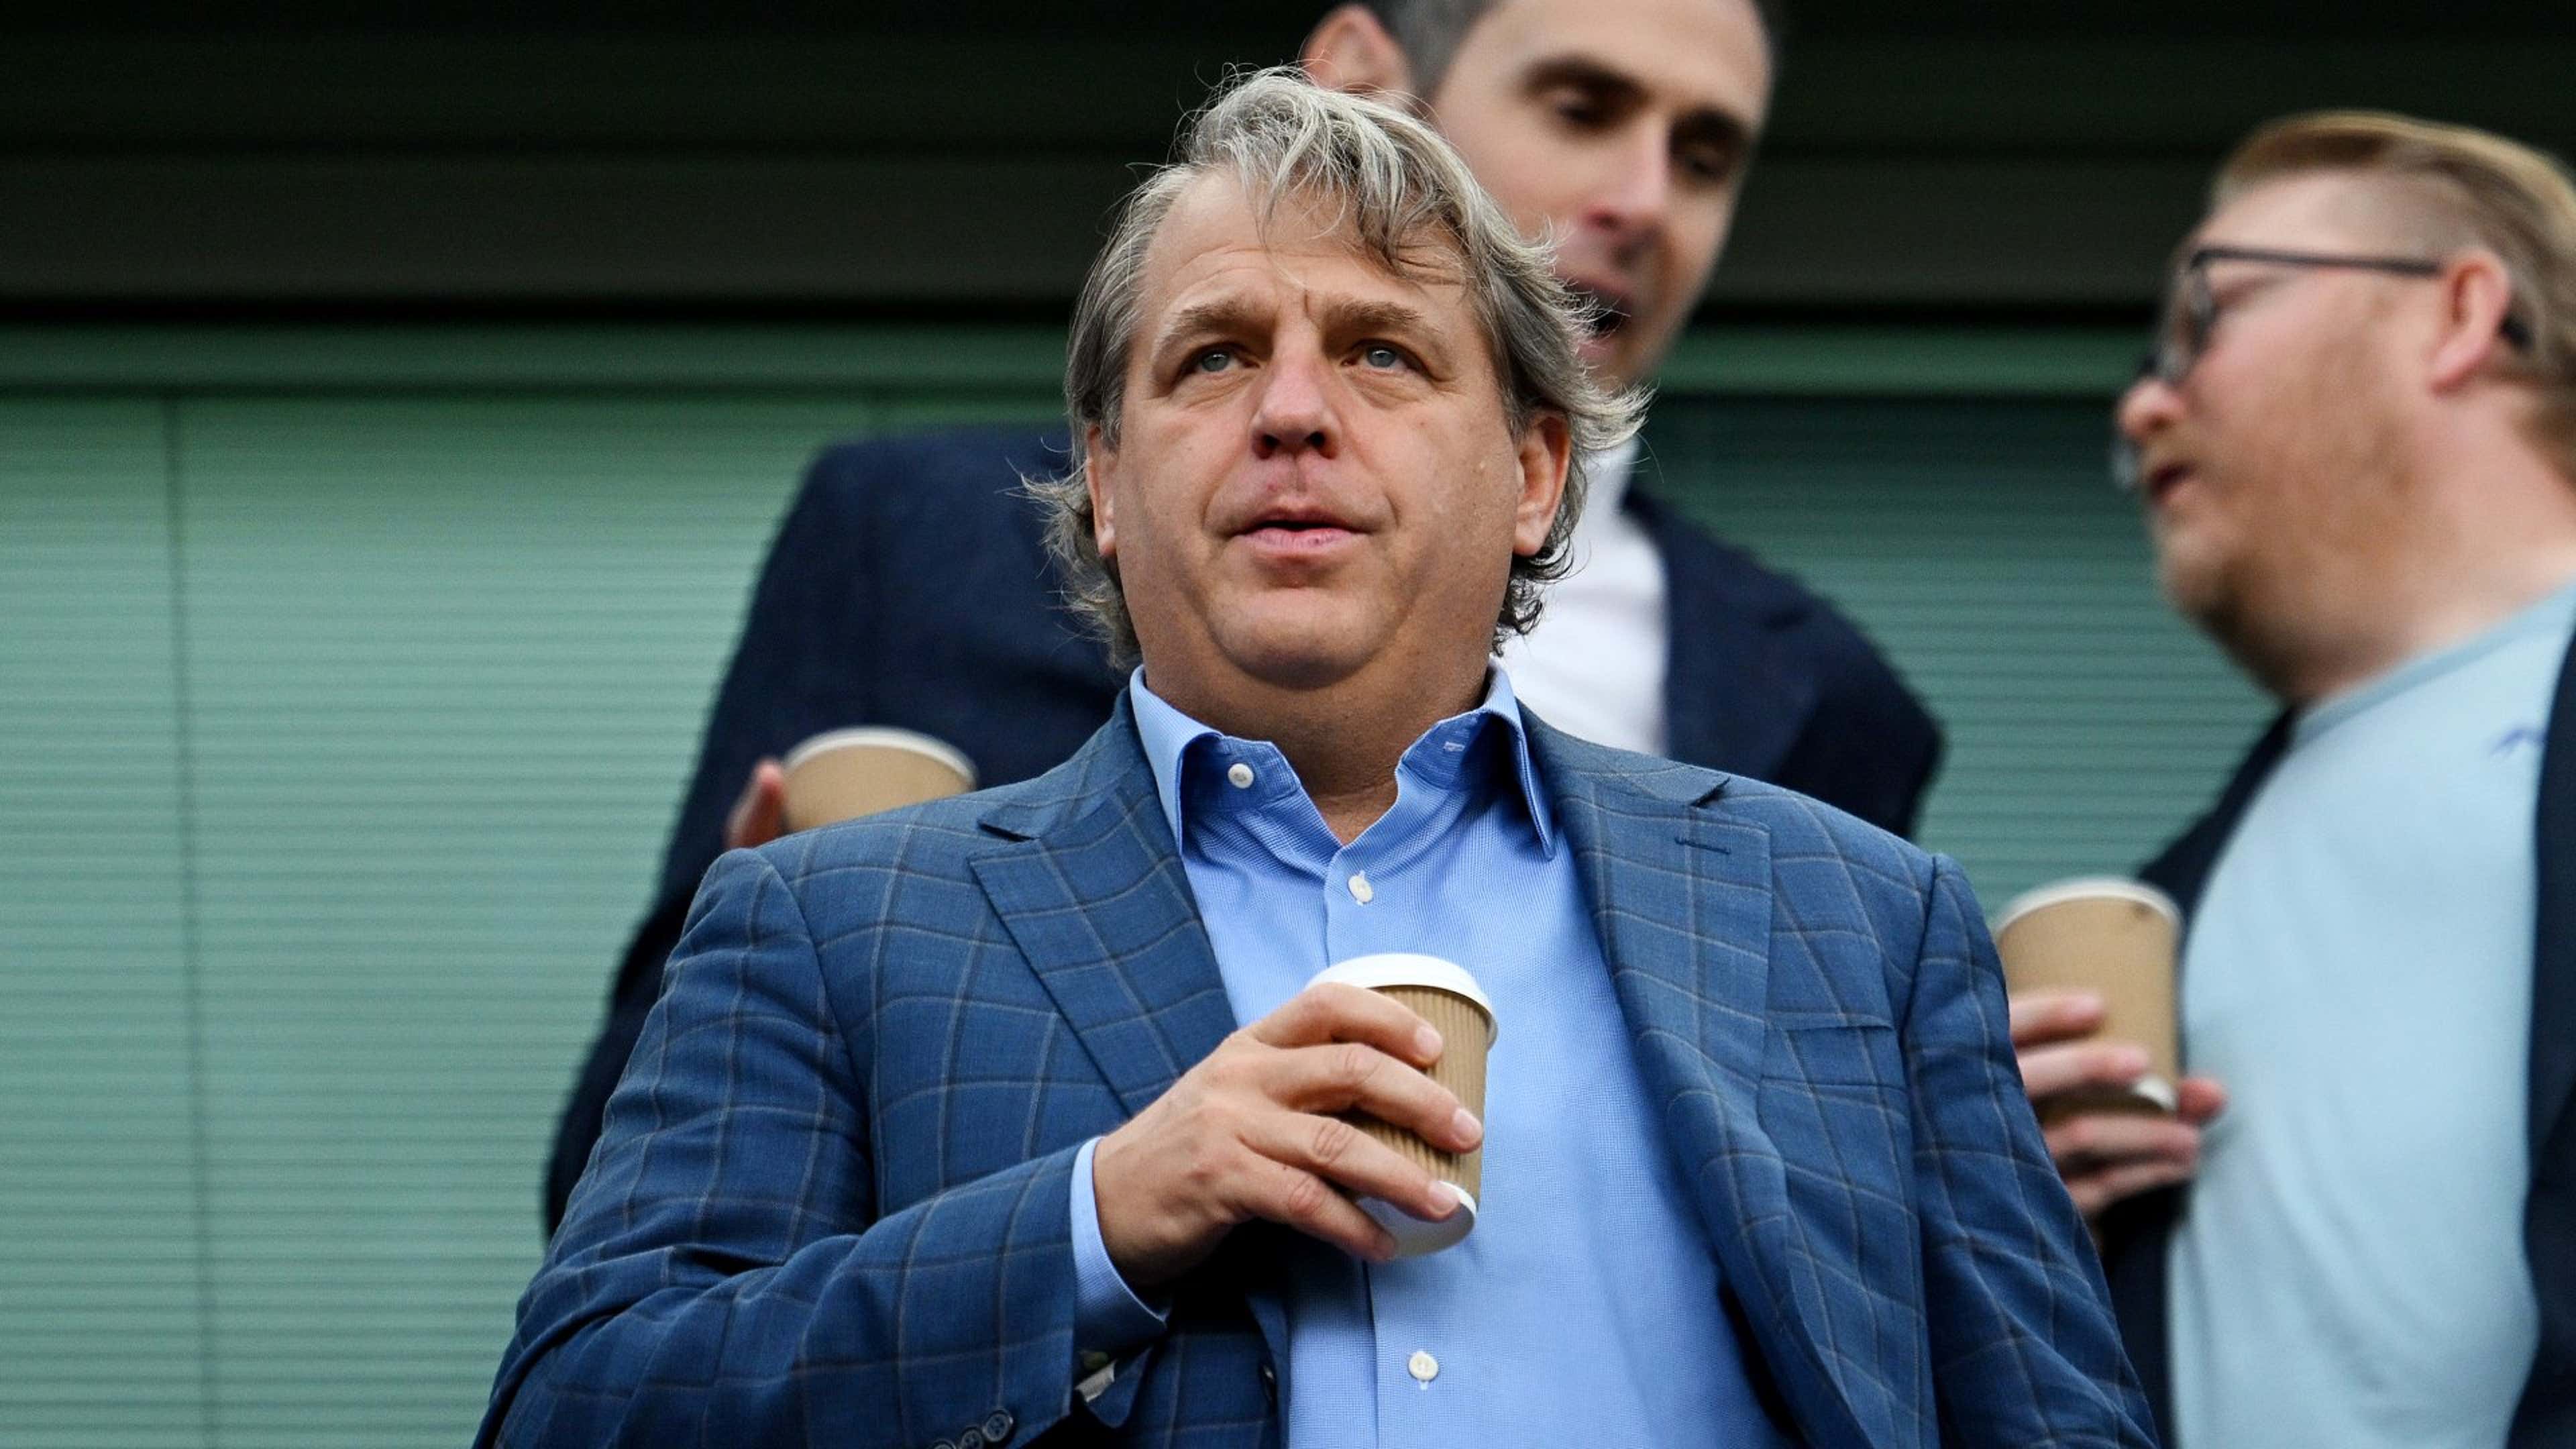 Todd Boehly out?! Chelsea co-owner to be removed as chairman in major shakeup | Goal.com